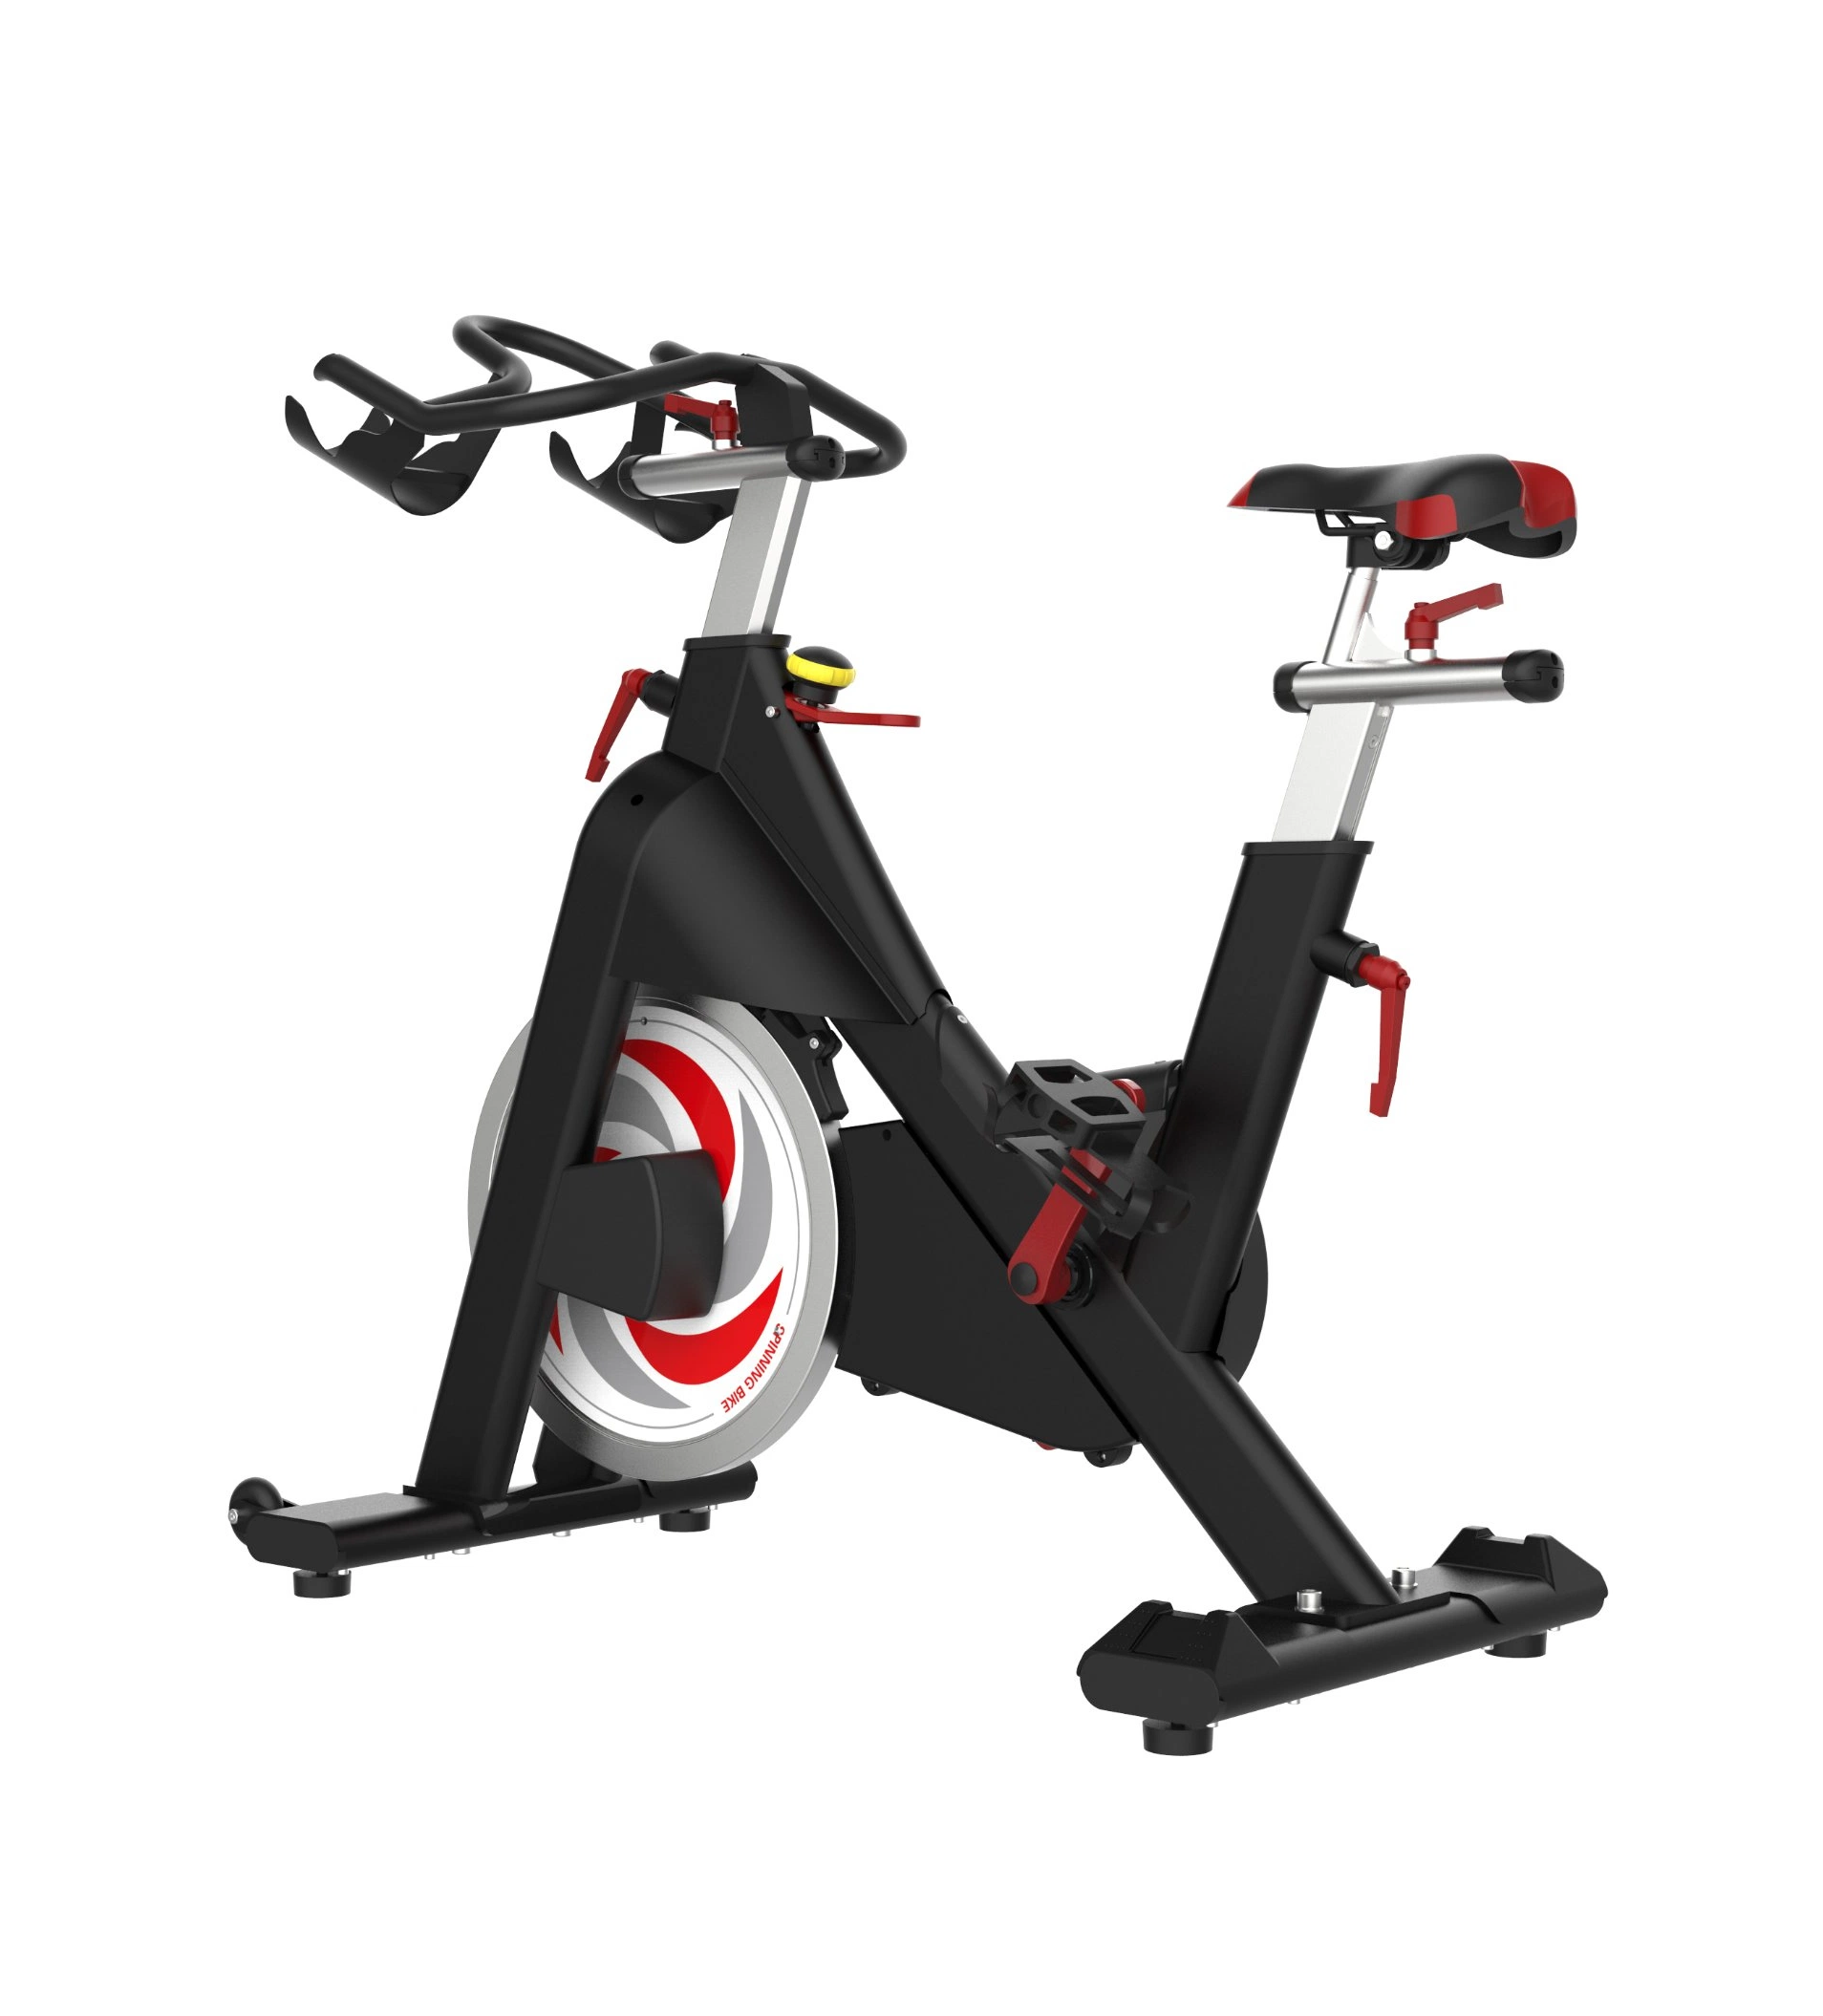 New Commercial Indoor Training Home Gym Fitness Equipment Exercise Machine Magnetic Spinning Exercise Home Fitness Spin Bike Sports Bike